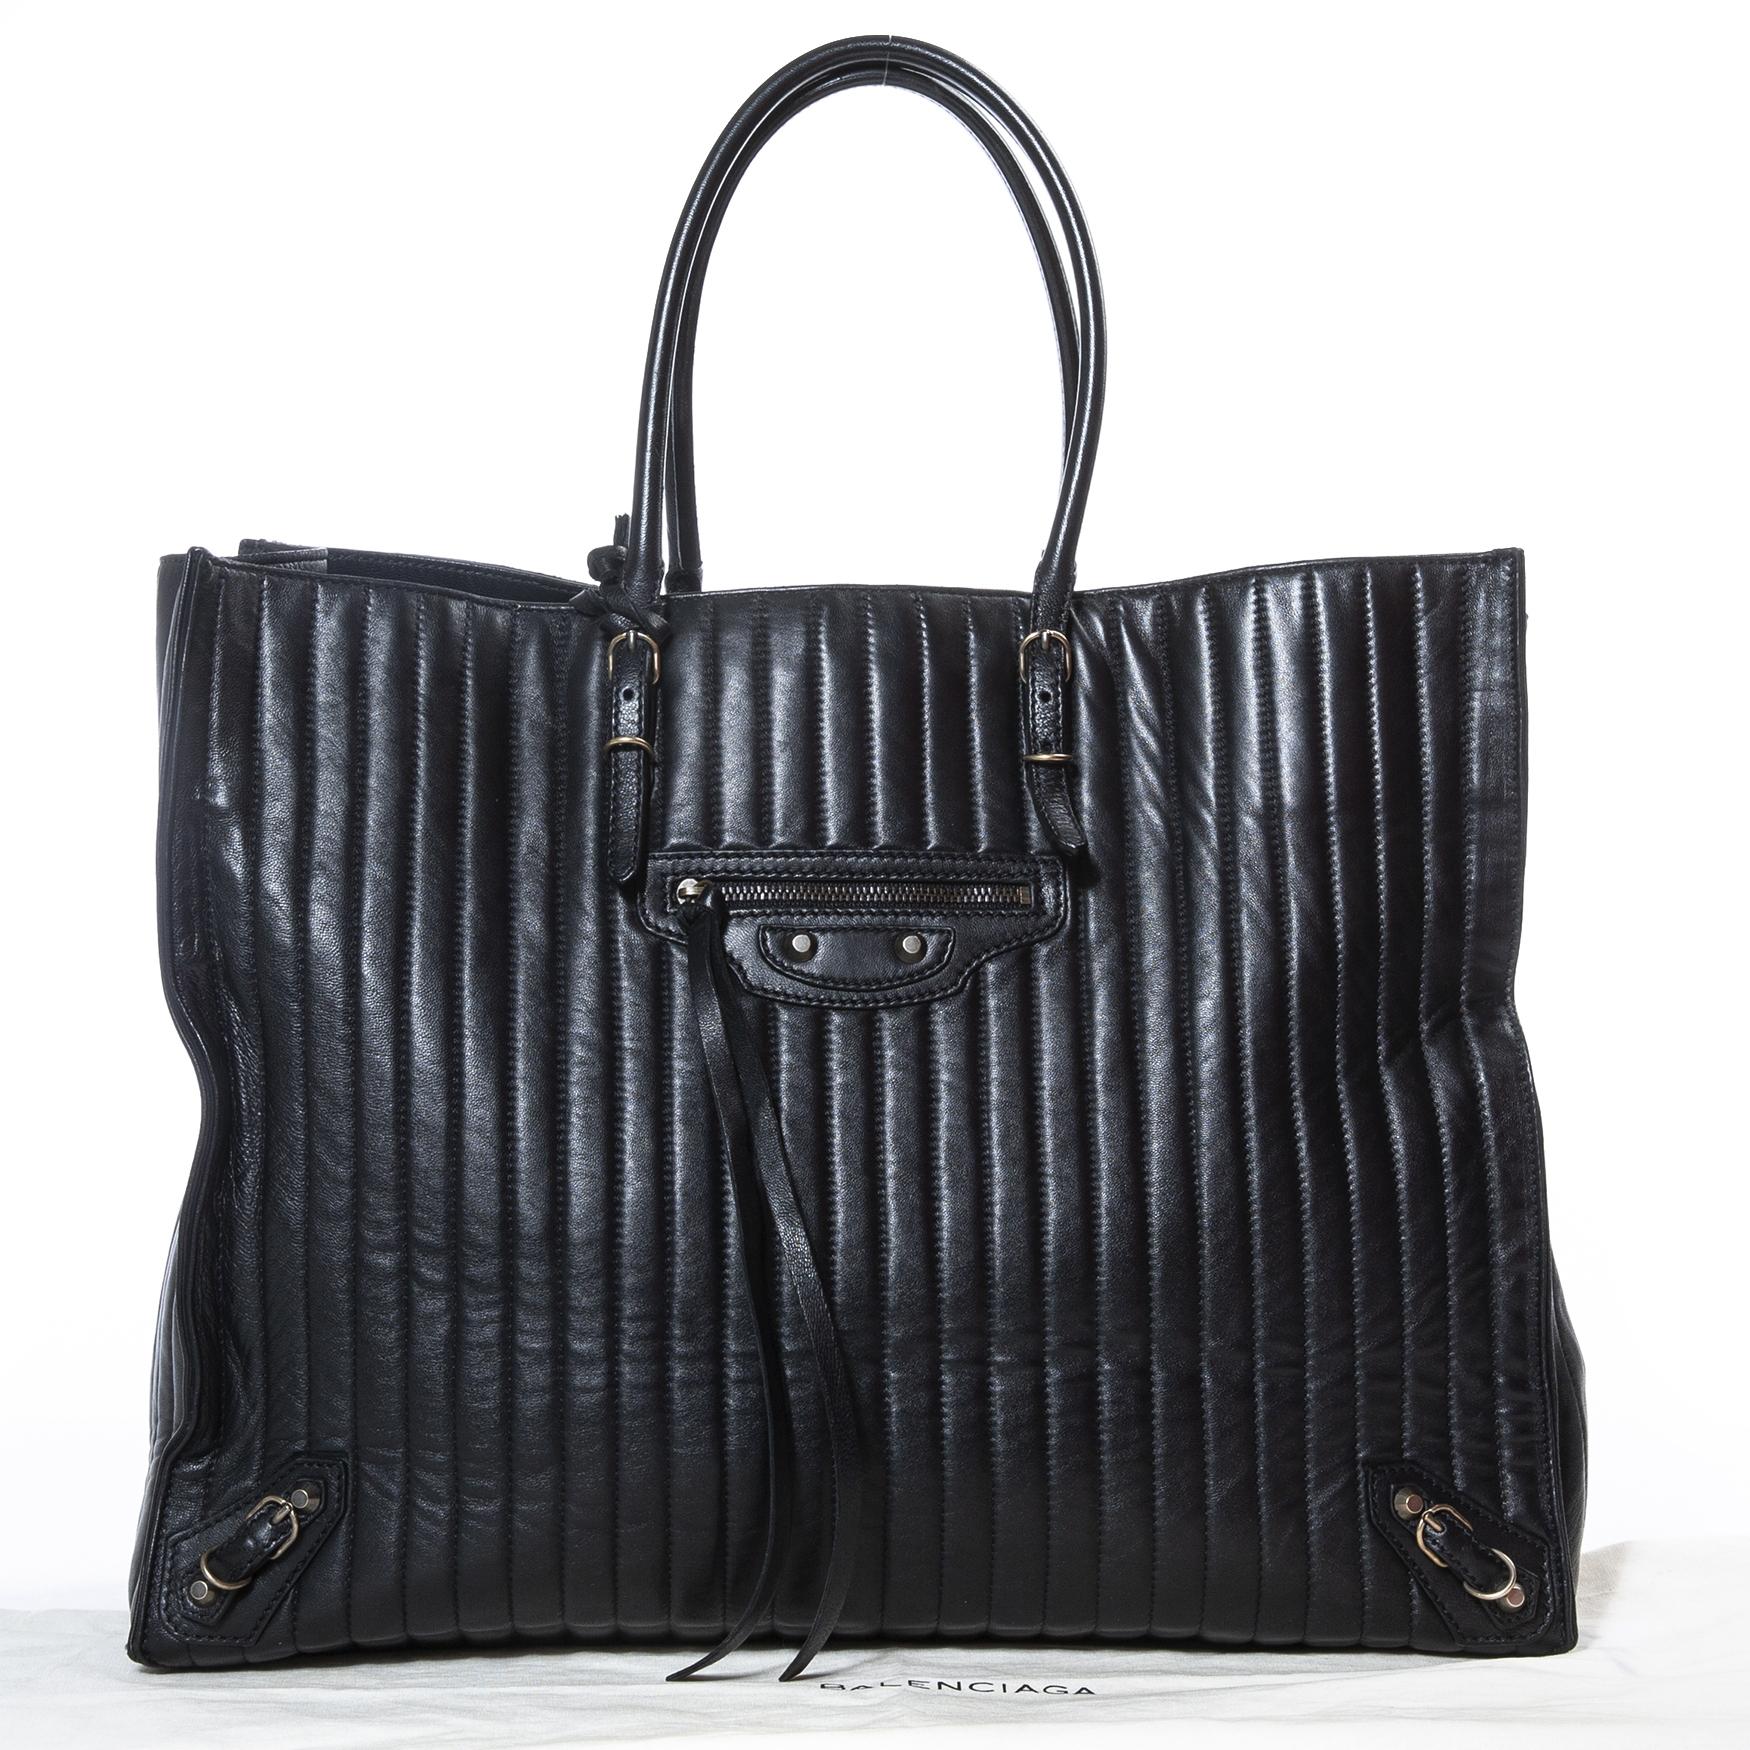 Very good condition

Balenciaga Vertical Quilted Black Papier A4 Tote

This gorgeous bag by Balenciaga is crafted from black vertical quilted leather, which gives the bag a unique look!
It features aged gold-tone hardware, including the iconic